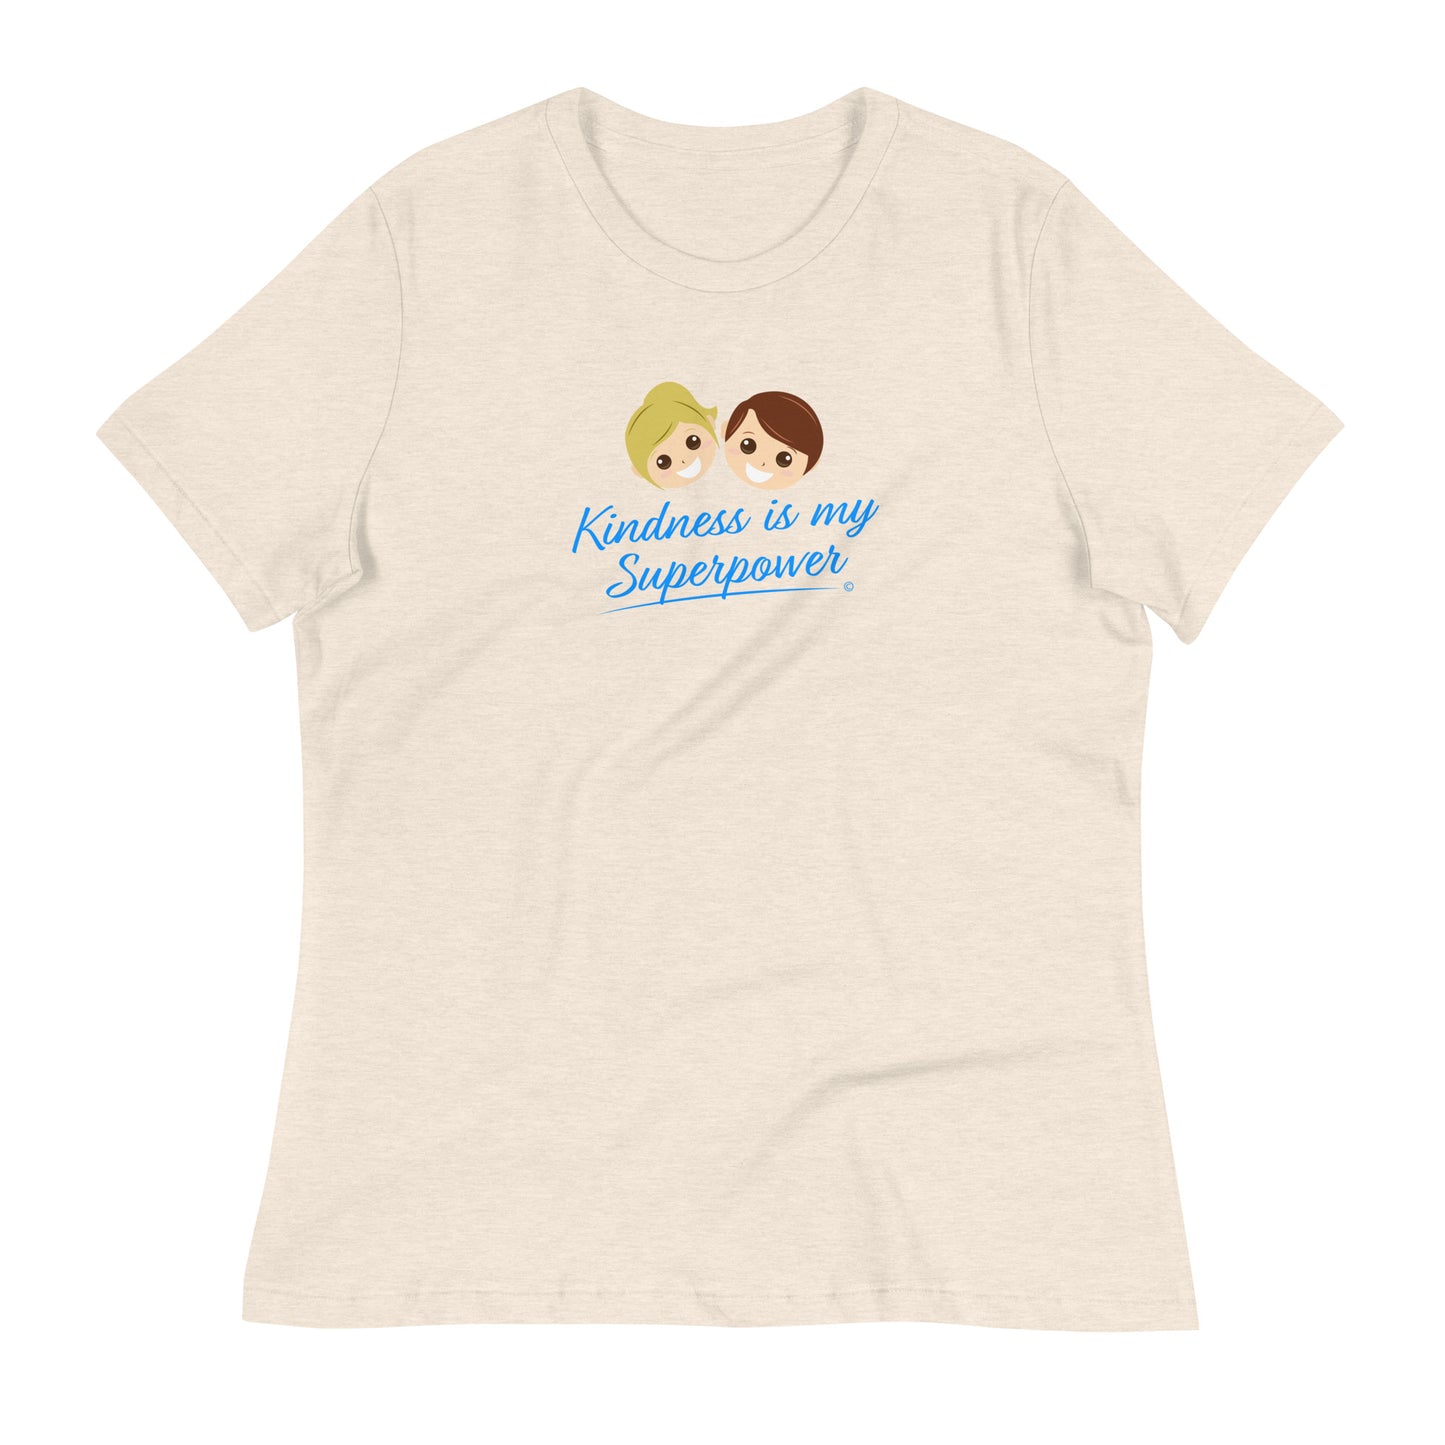 Heather prism natural shirt featuring the empowering quote 'Kindness is my Superpower' in bold lettering.